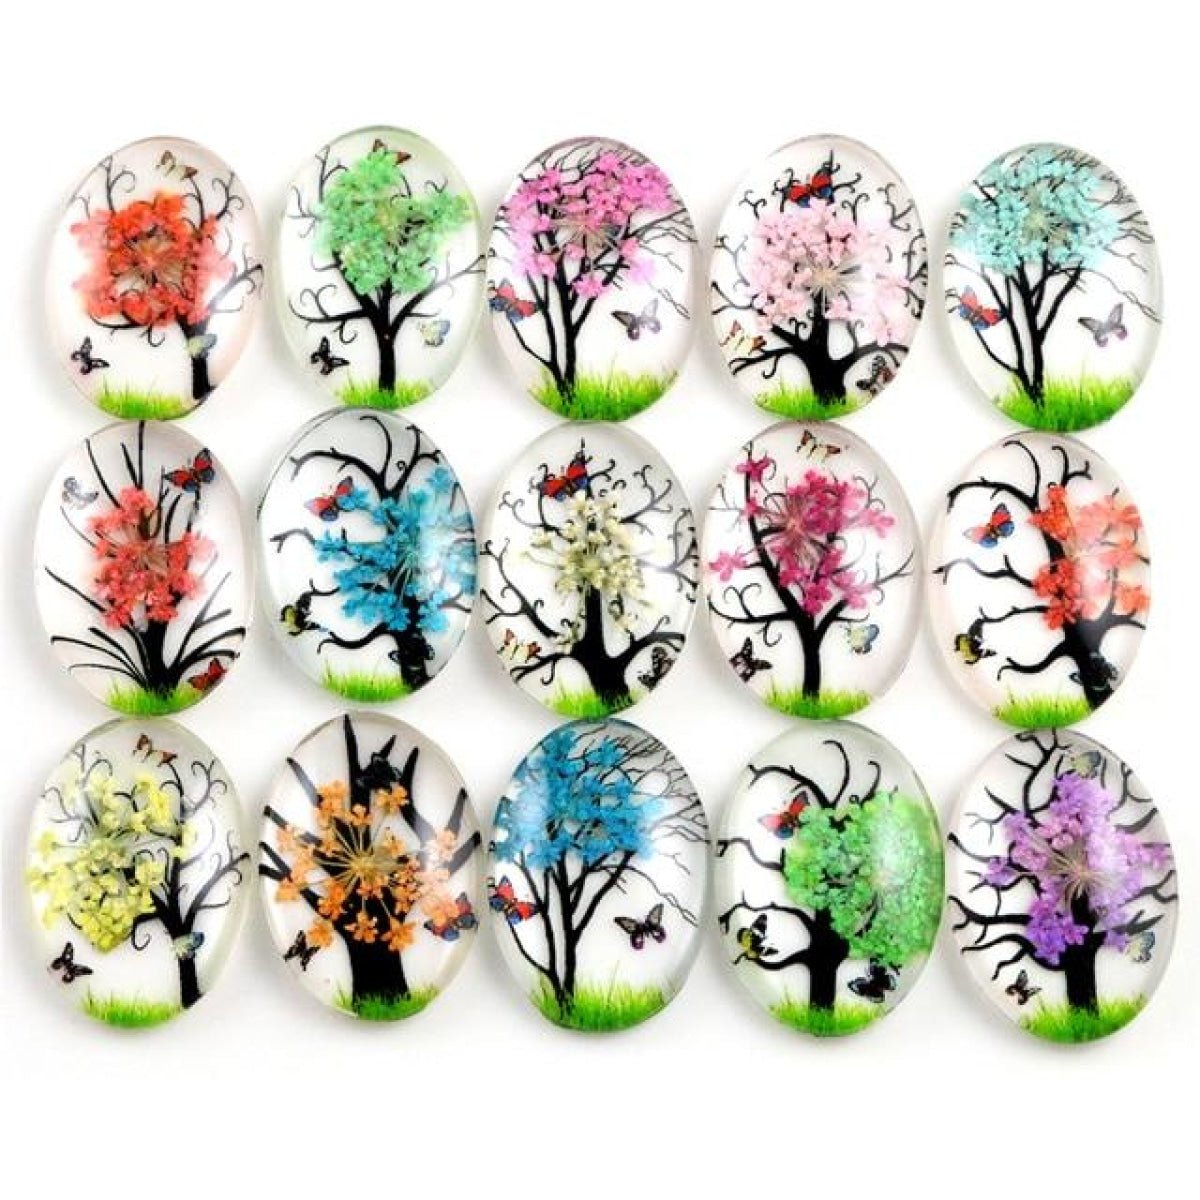 10pcs Glass Cabochons Flower Tree Life Handmade Oval Shape 18x25mm Jewellery Accessories - TREES 10 - - Asia Sell